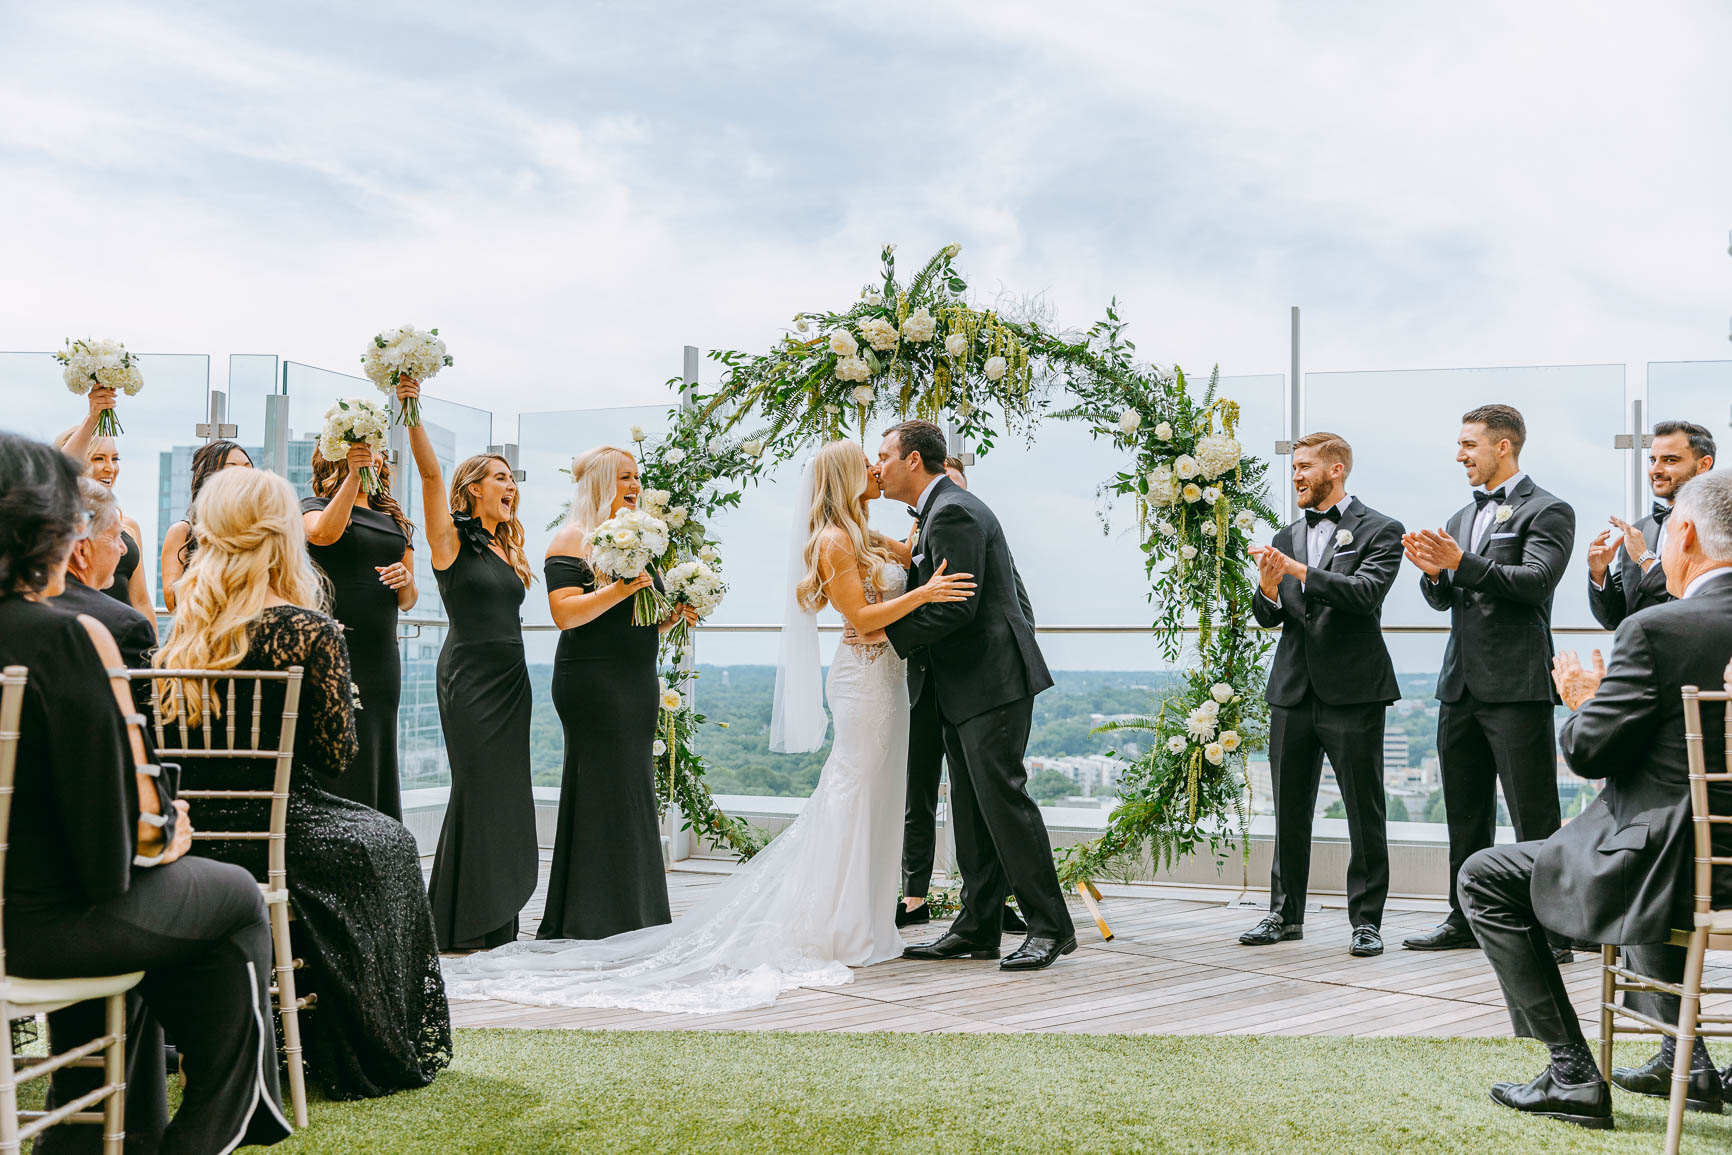 merchant & trade rooftop wedding ceremony in uptown Charlotte by Nhieu Tang Photography | nhieutang.com